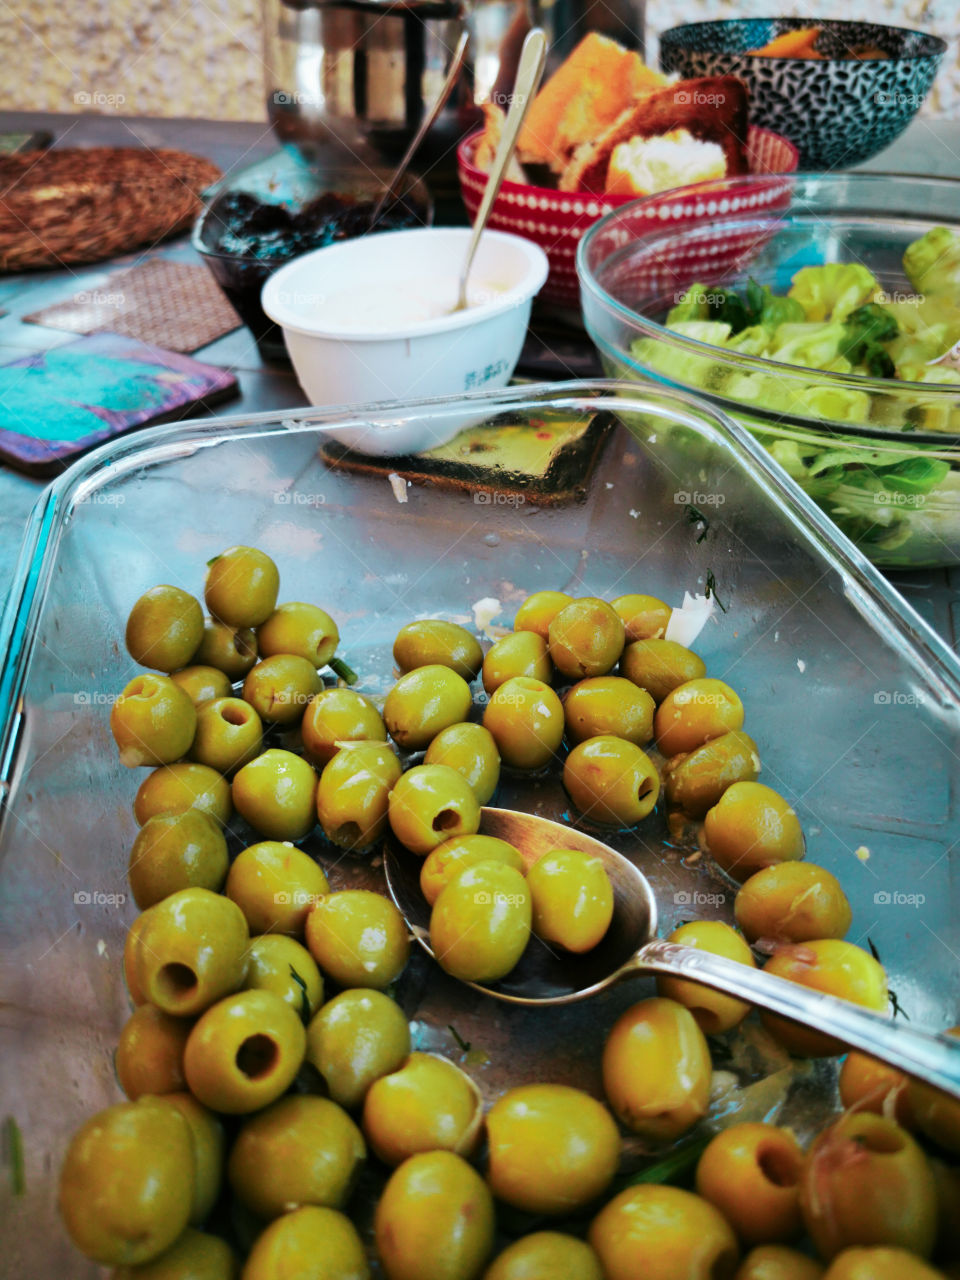 Olives and other foods on the table